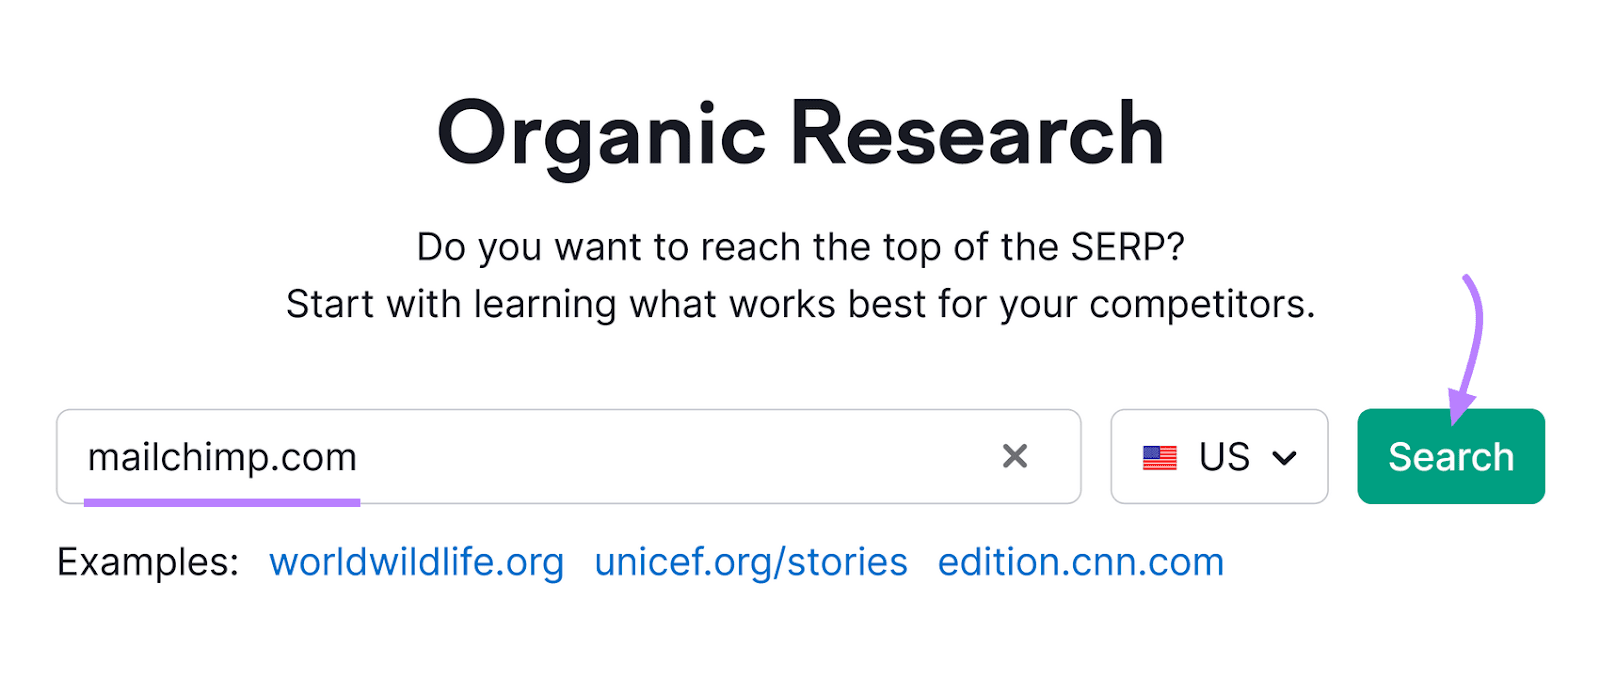 Organic Research tool with “mailchimp.com” entered.